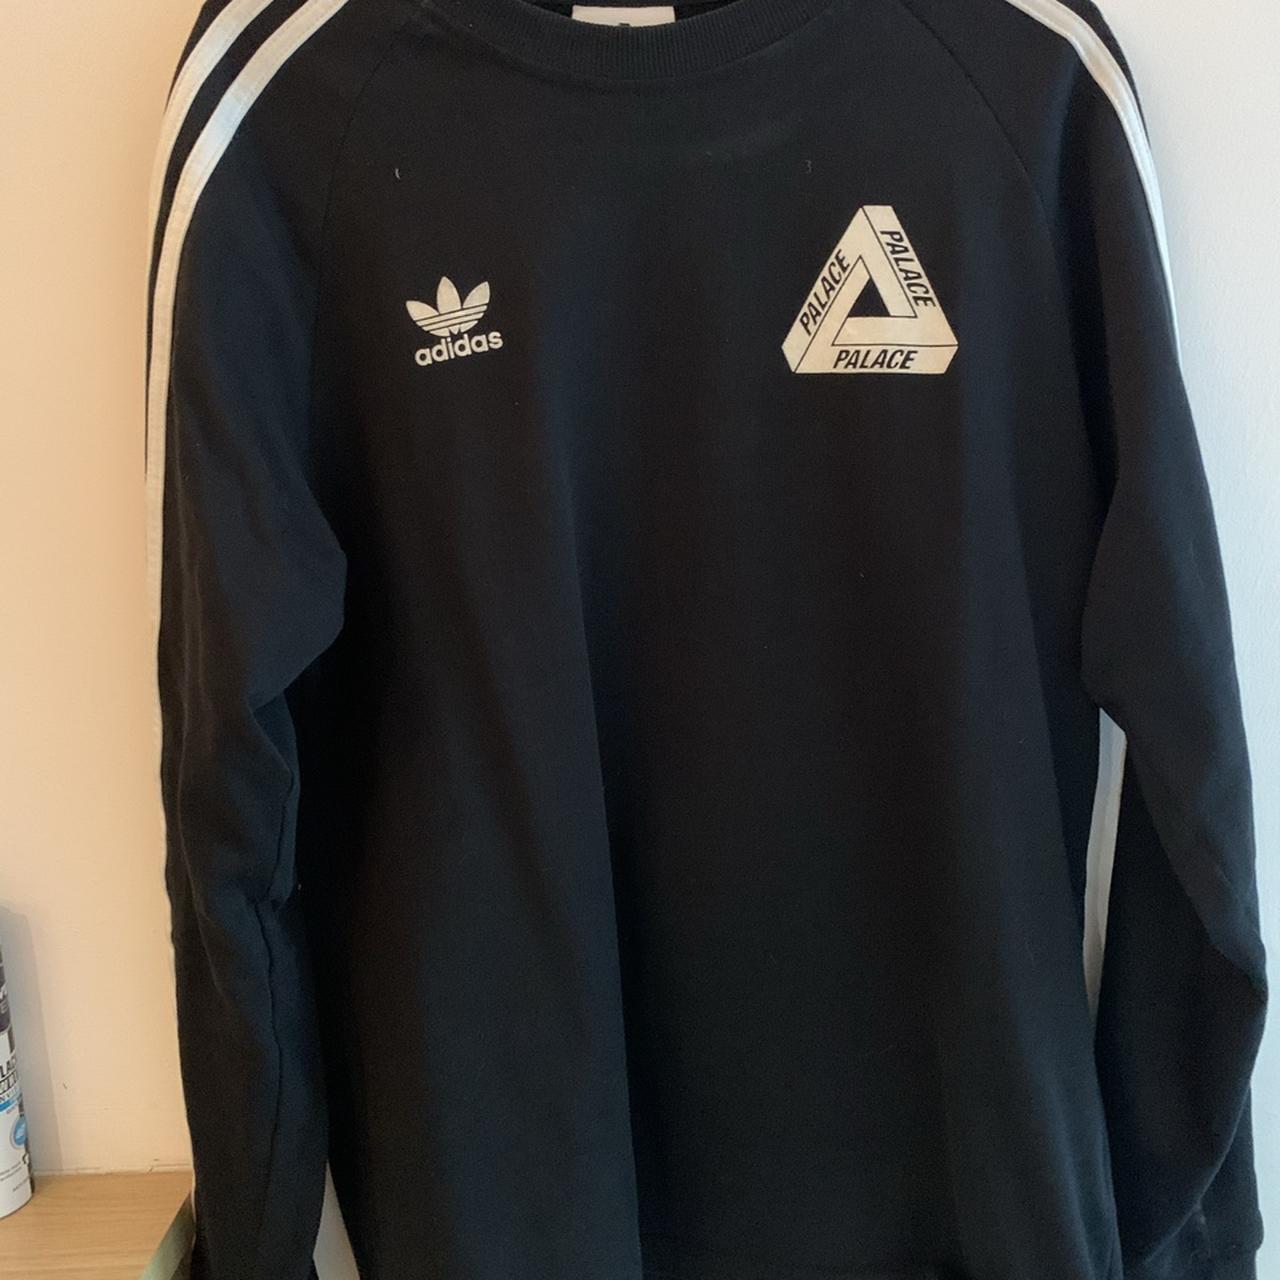 Adidas X Palace Long Sleeve Top. Great condition. - Depop